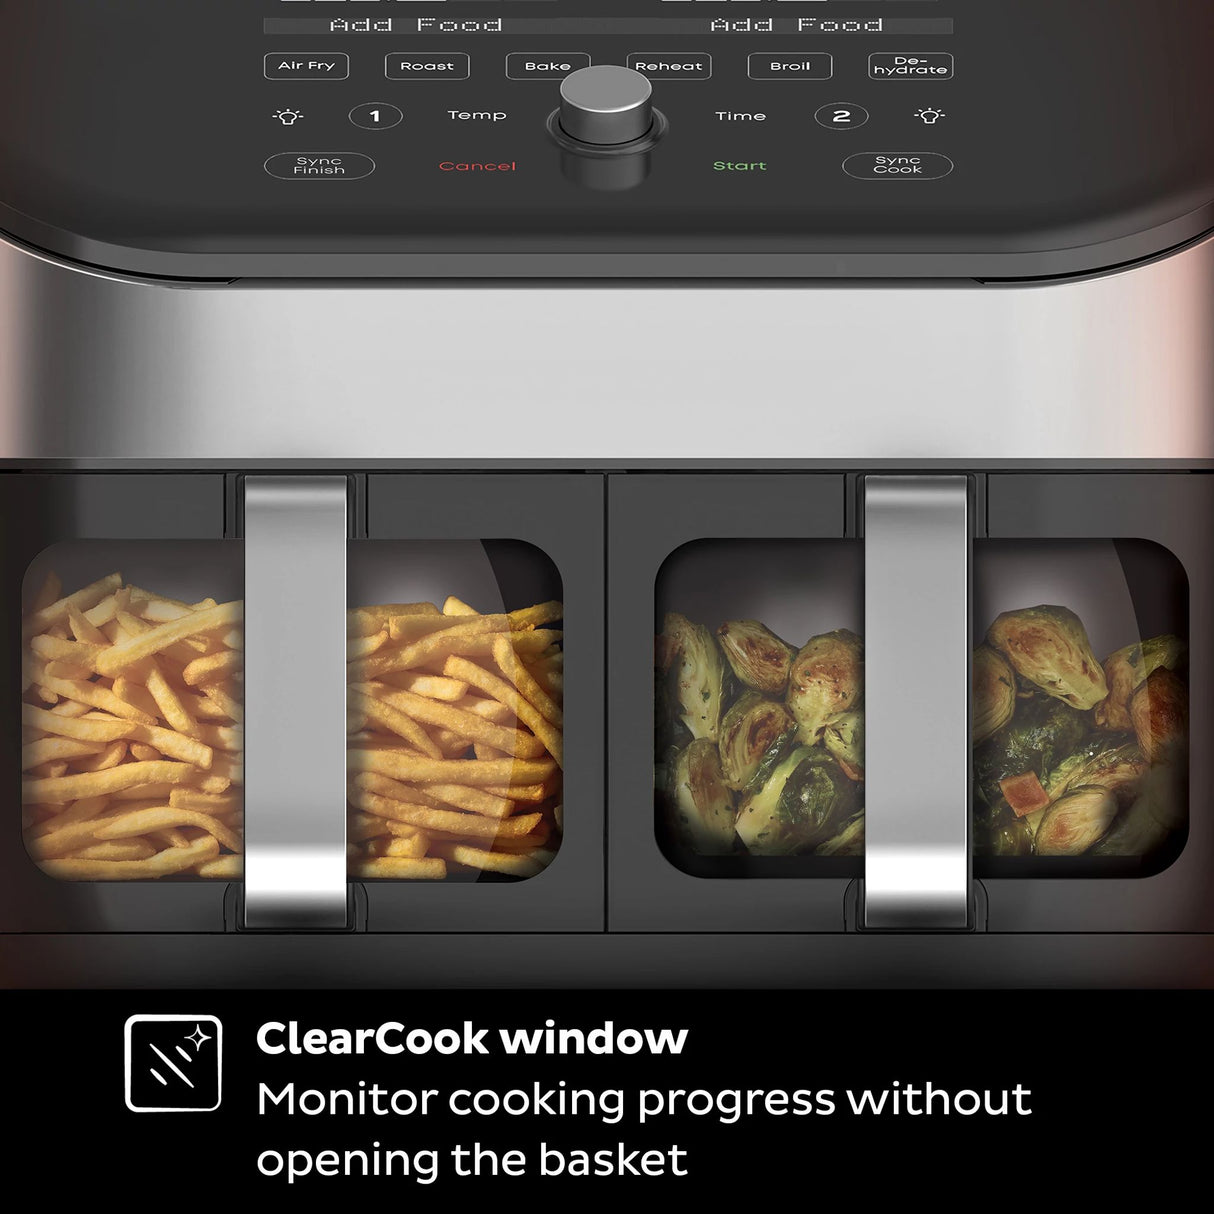  Vortex™ Plus Dual 8-quart Stainless Steel Air Fryer with ClearCook front view with food inside